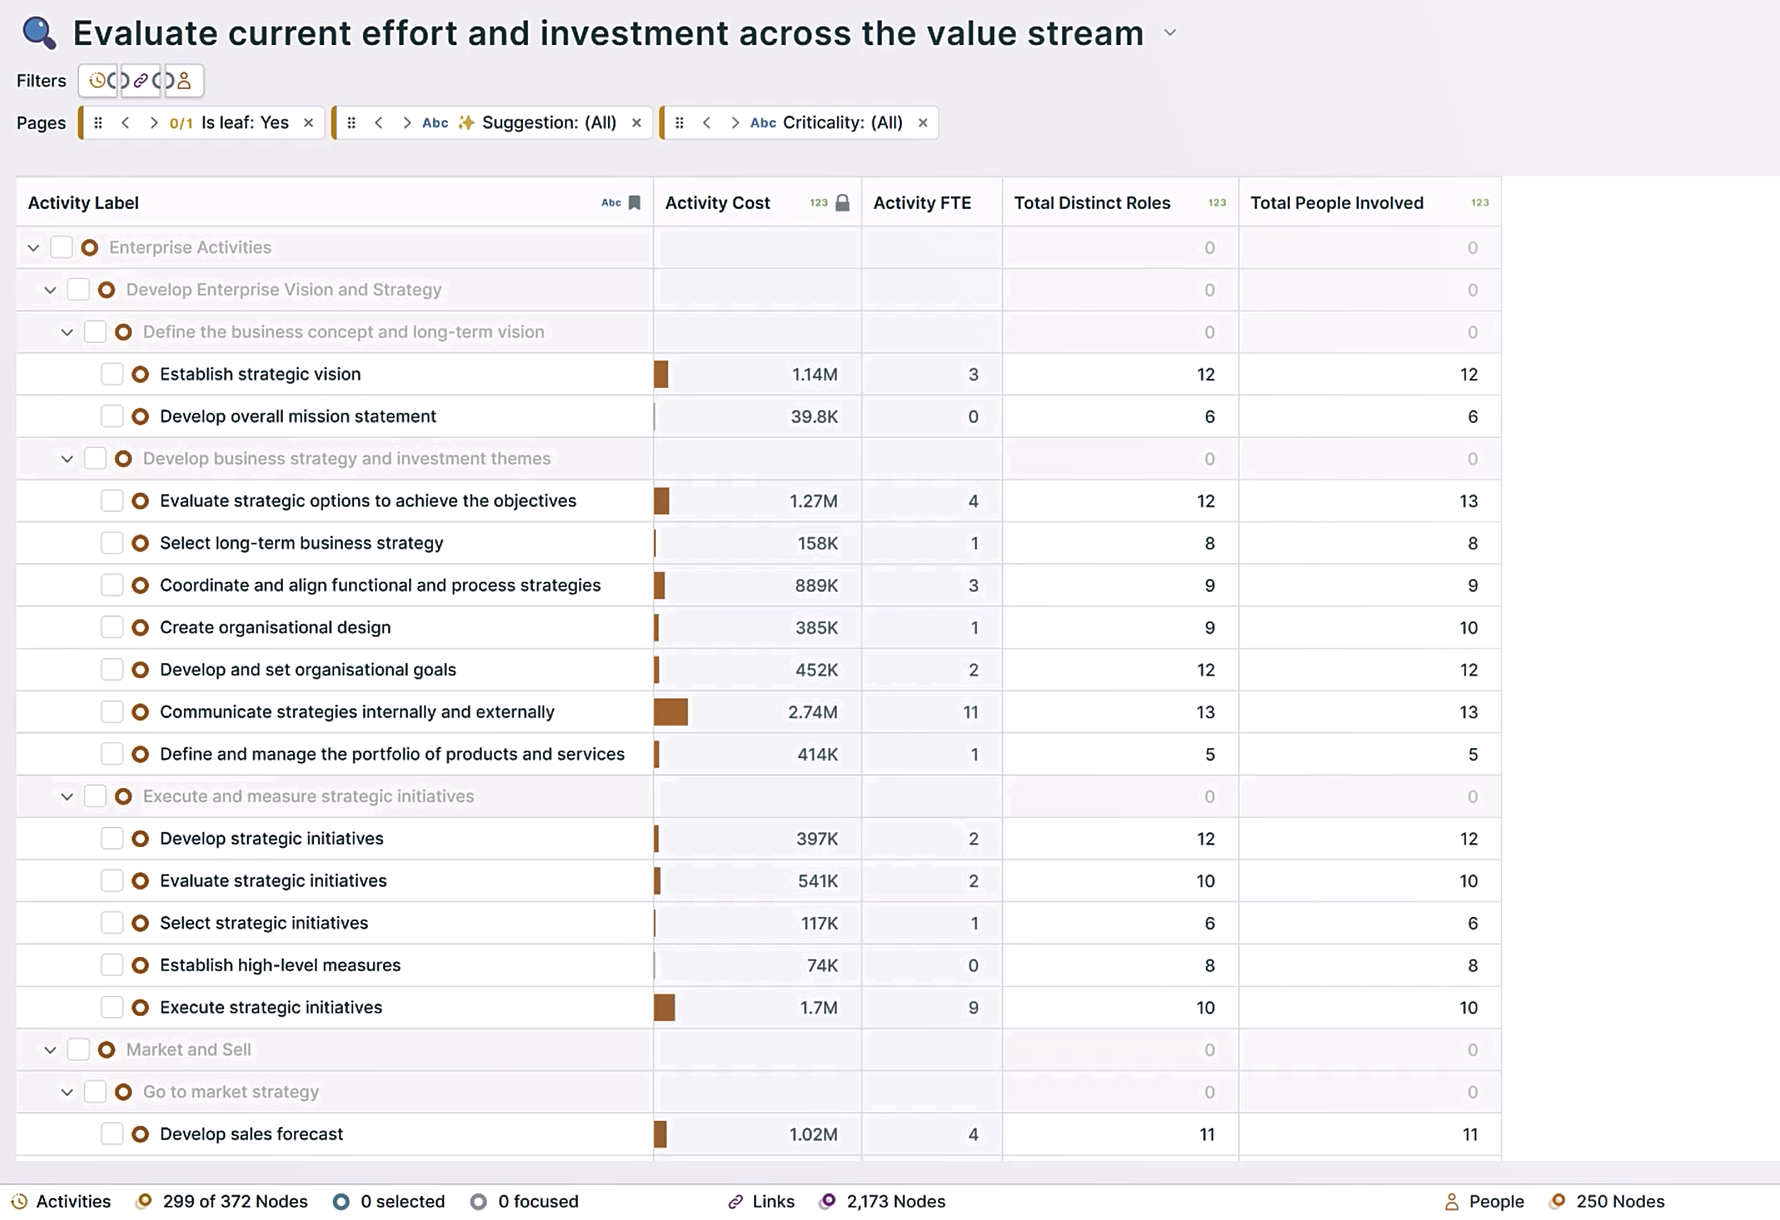 A screenshot from Orgvue - 'Evaluate current effort and investment across the value stream'